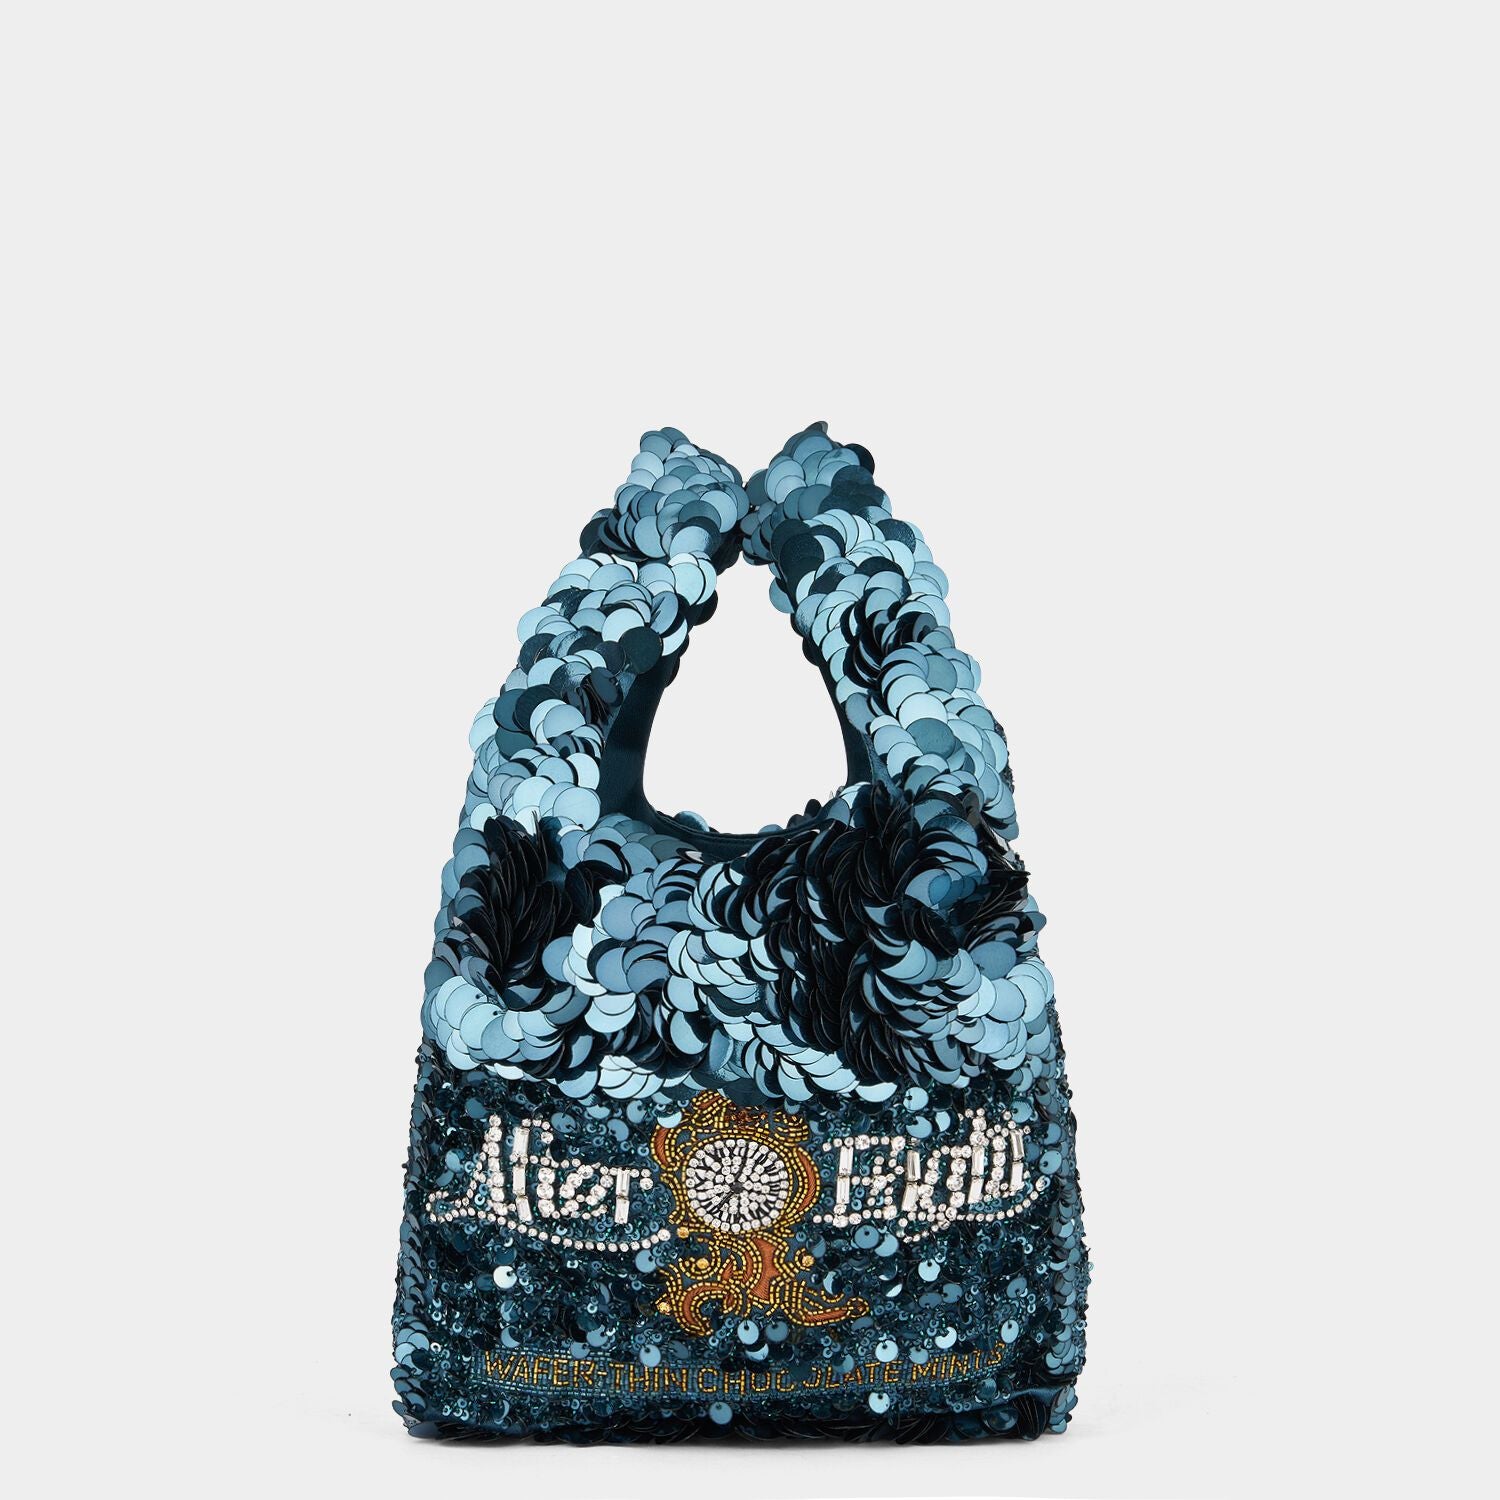 「After Eight®」 トート -

                  
                    Satin in Dark Teal -
                  

                  Anya Hindmarch JP
